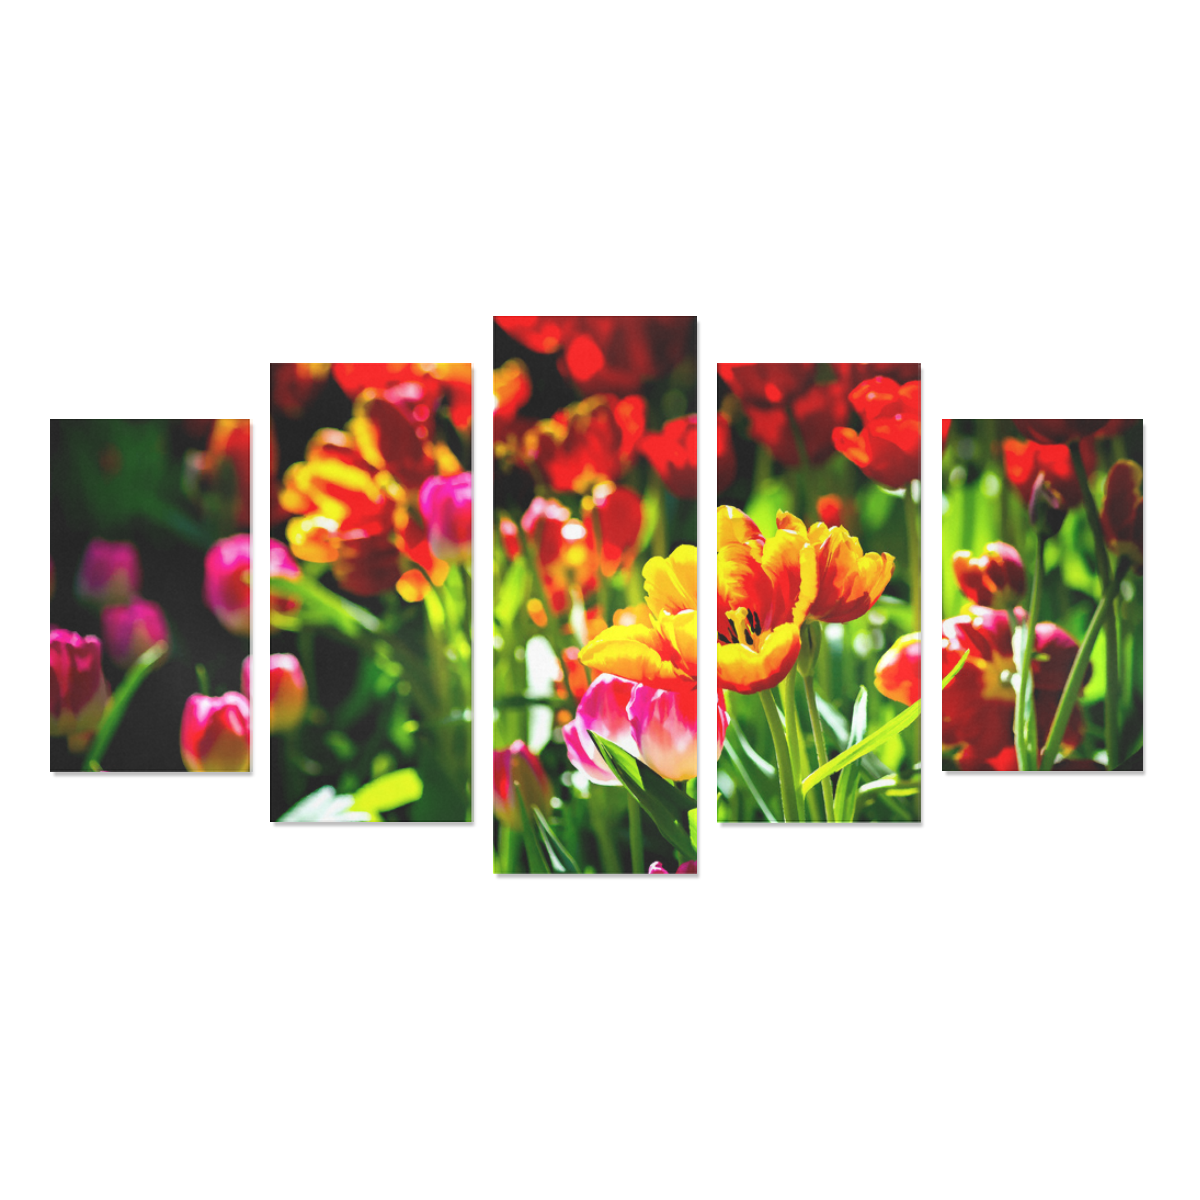 Colorful tulip flowers chic spring floral beauty Canvas Print Sets A (No Frame)